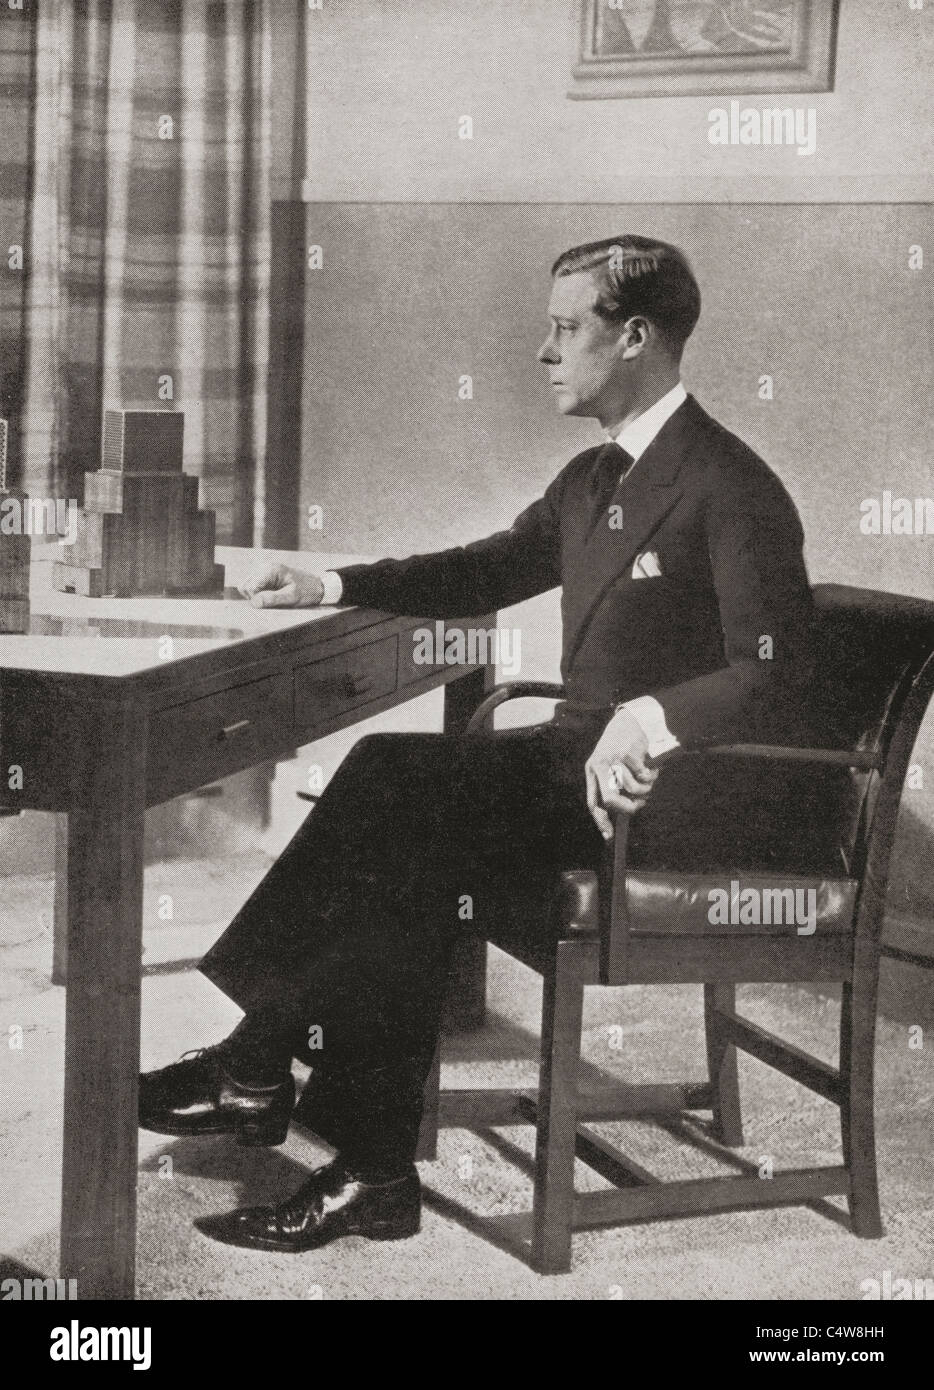 King Edward VIII, preparing to broadcast his decision to abdicate, from Broadcasting House, 11 December 1936. Stock Photo